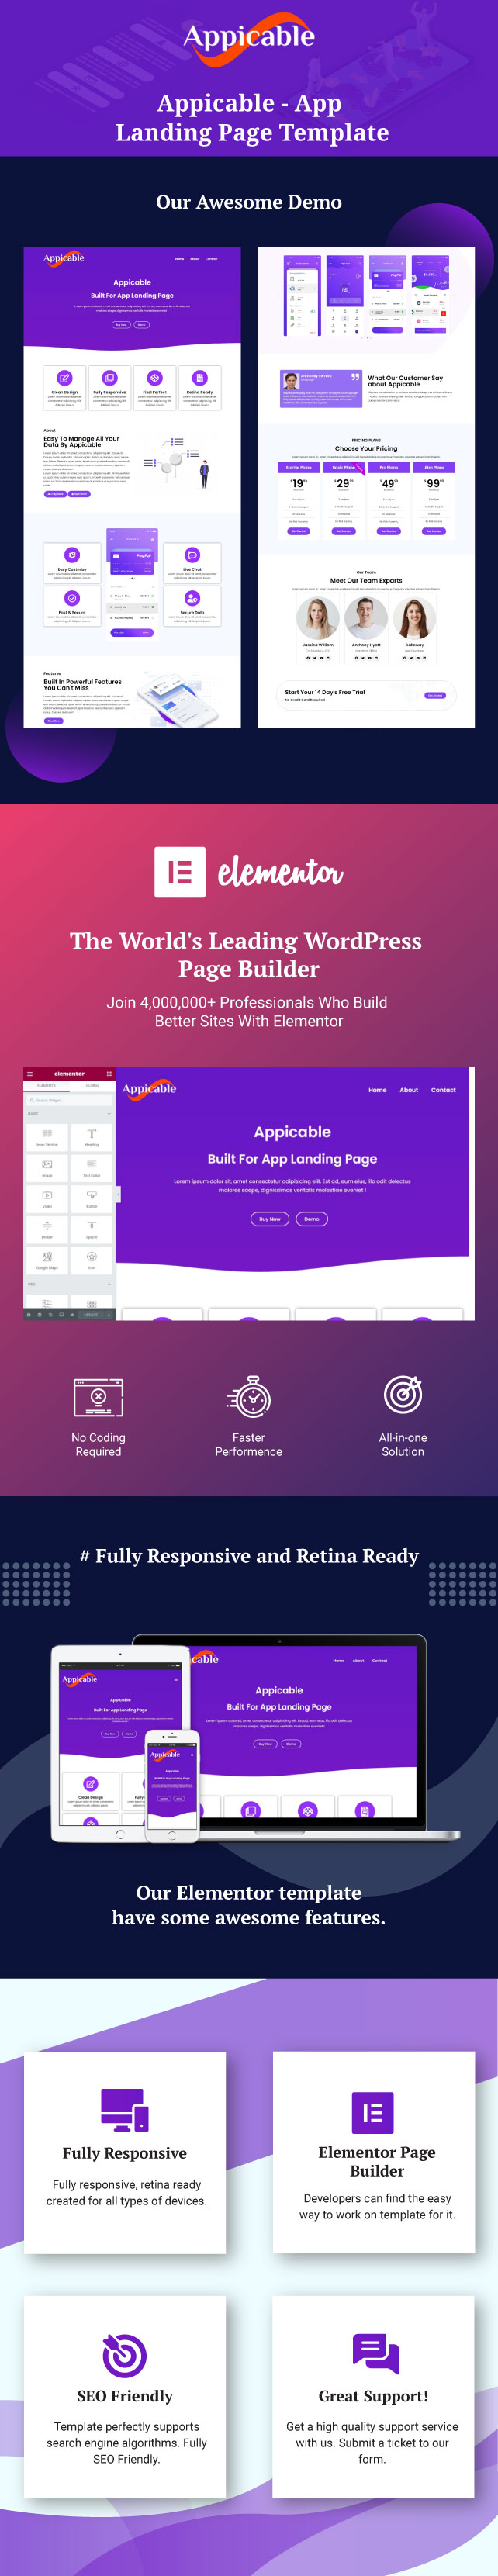 appicable-app-landing-page-template